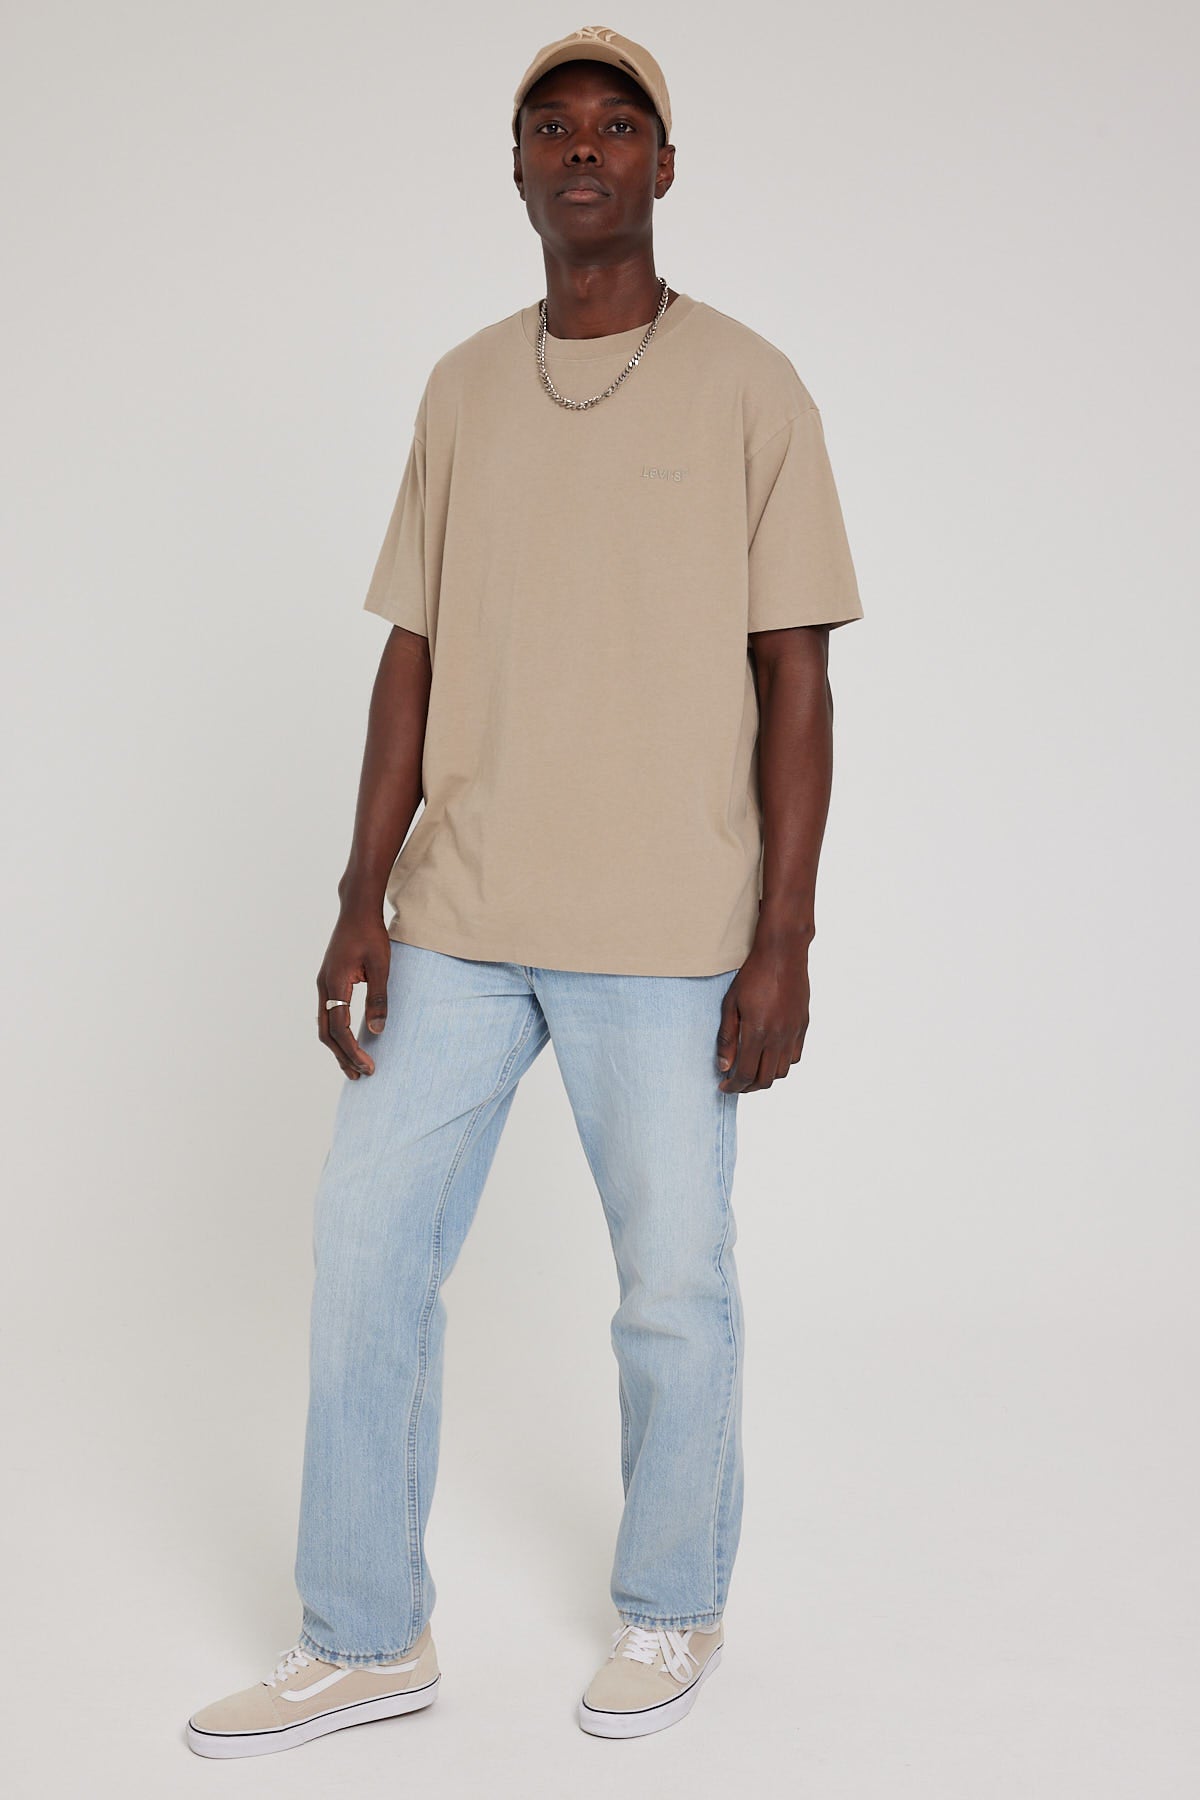 Levi's 550 Relaxed Jean Can't Stand Rain